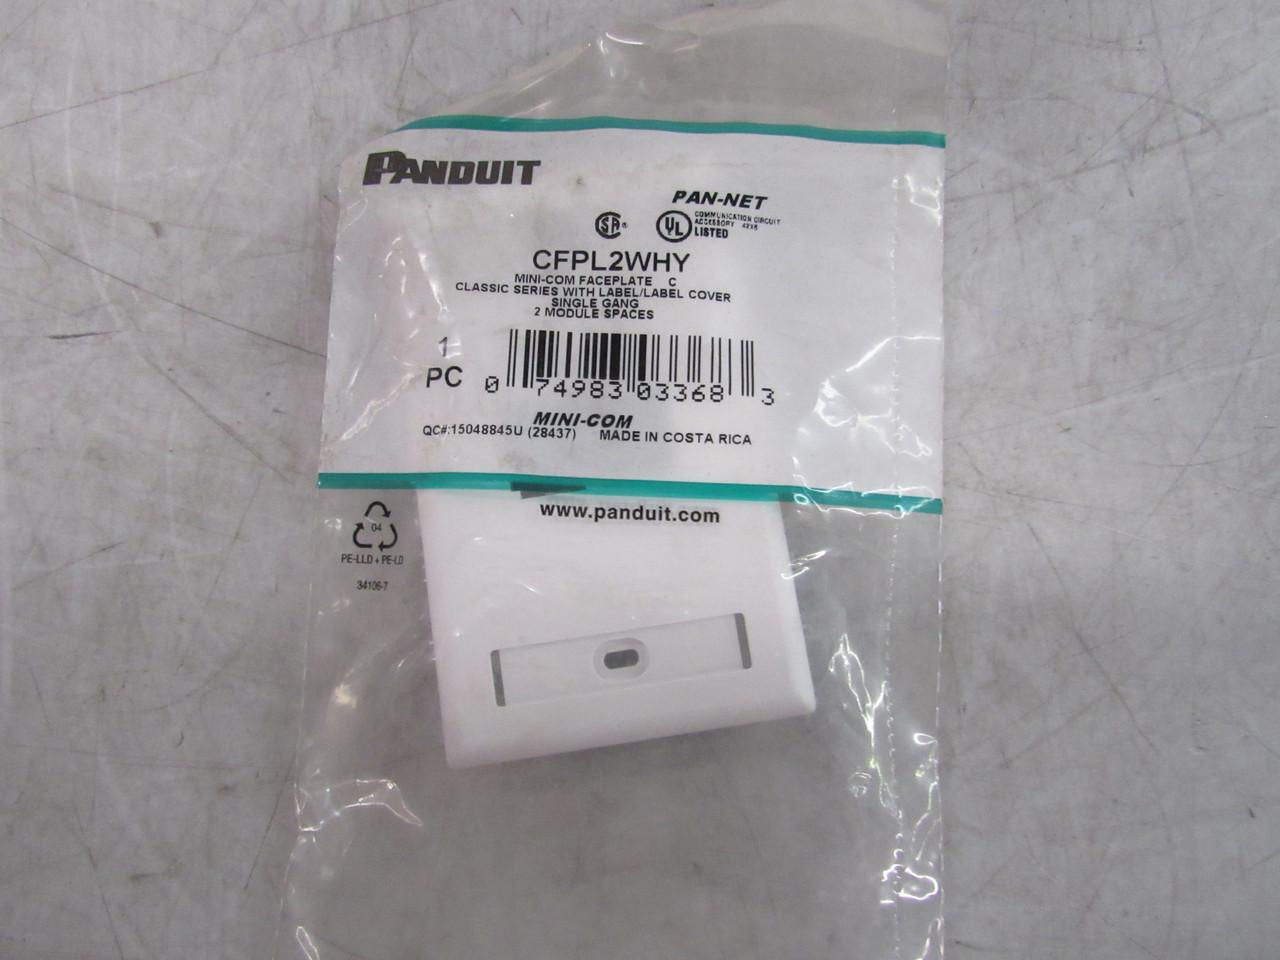 Panduit CFPL2WHY 2.75" x 0.68" x 4.5", 2-Port, 1-Gang, White, ABS, Snap In/Out, Vertical Mount, Flat